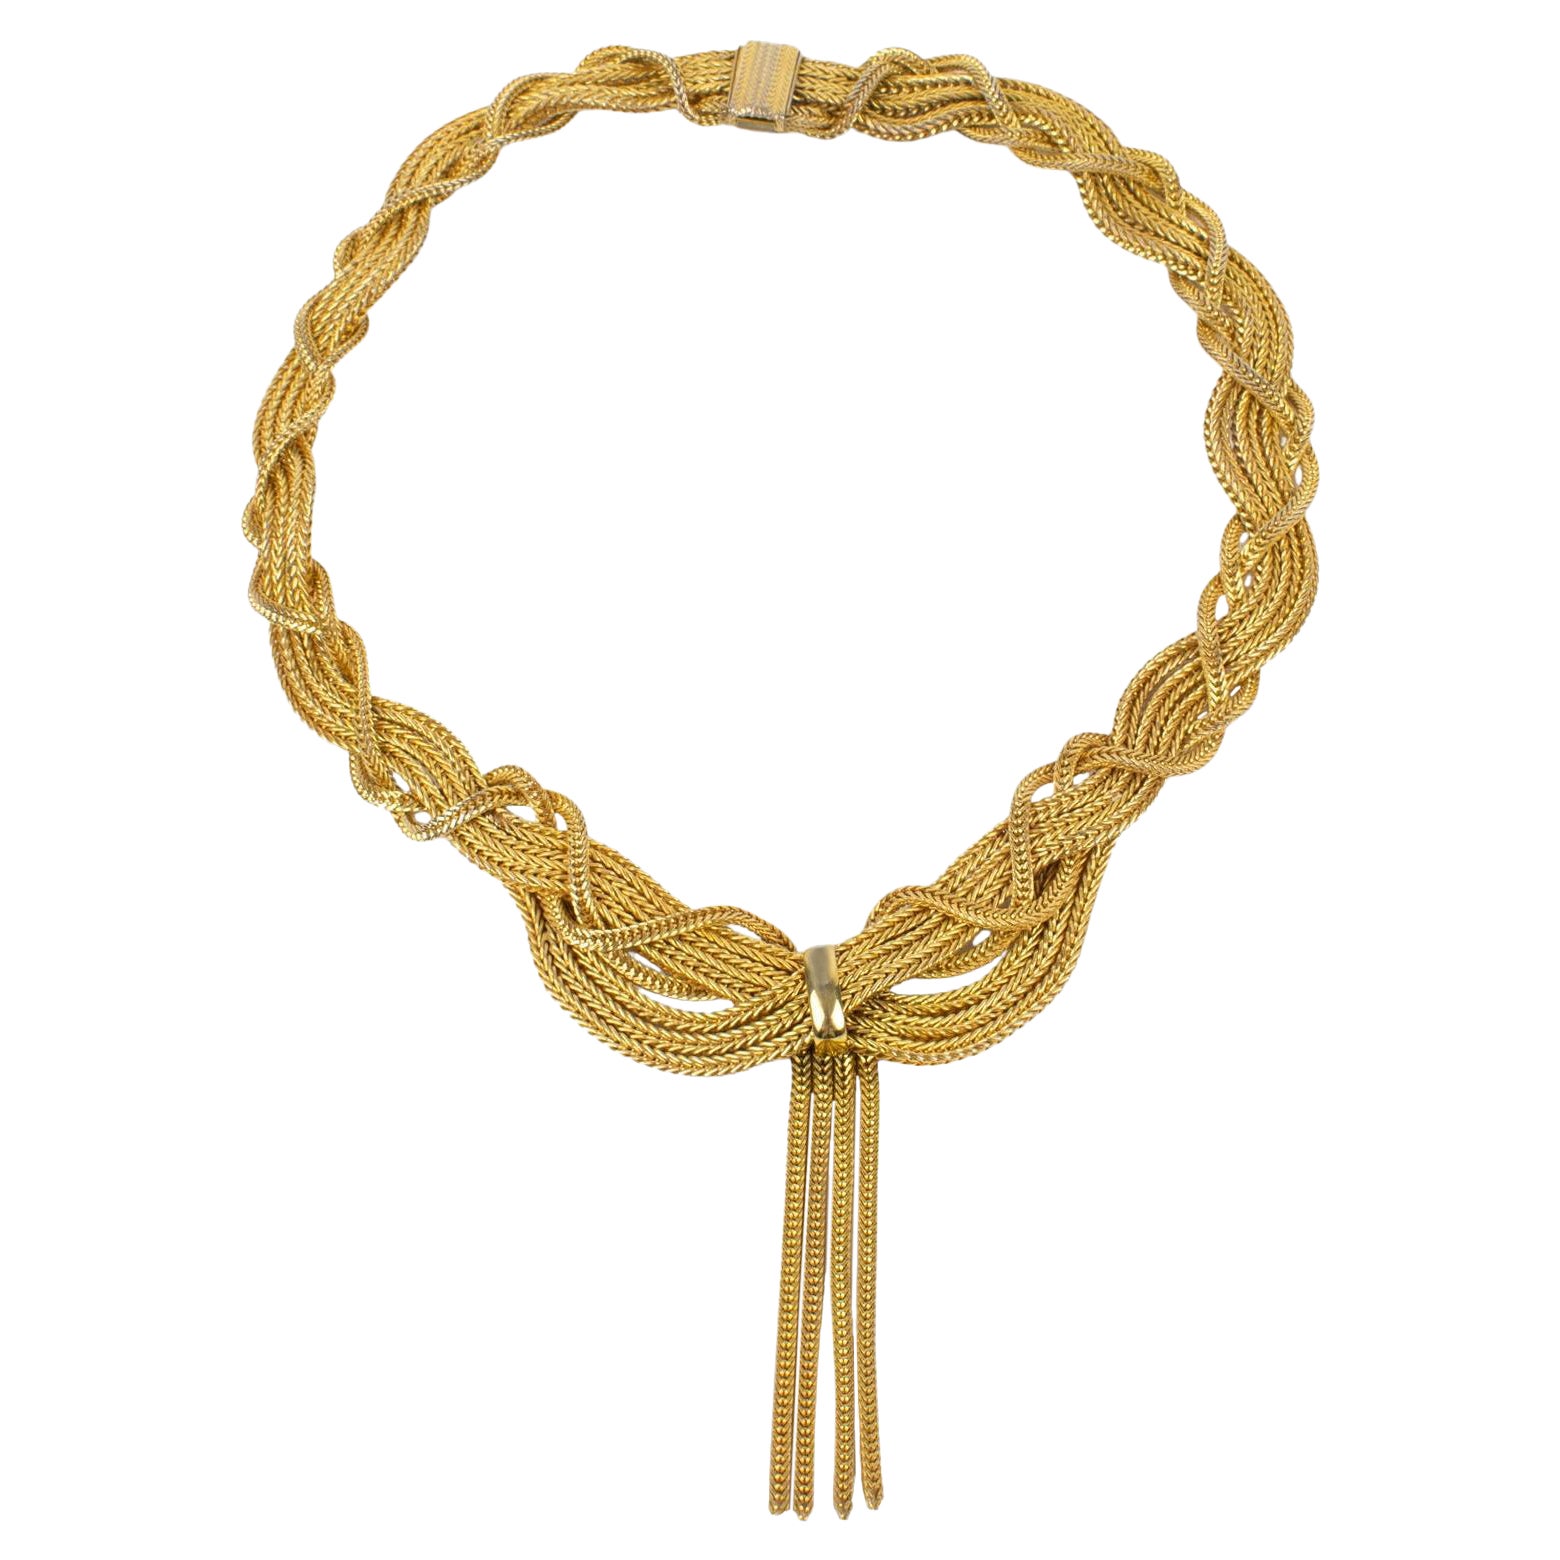 Christian Dior by Grosse 1958 Gilded Metal Braided Choker Necklace For Sale